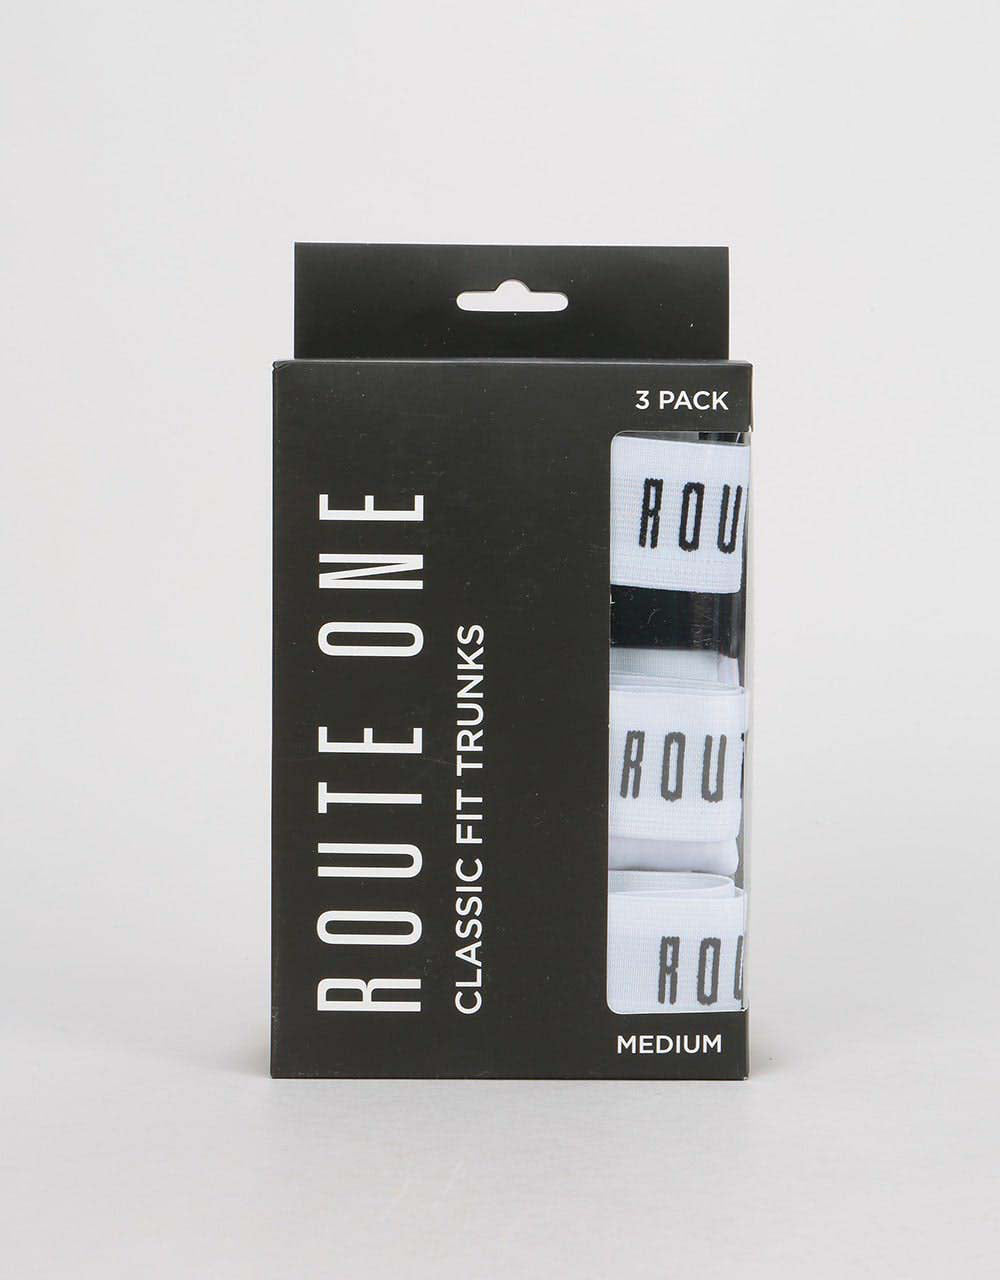 Route One Classic Boxer Shorts 3 Pack - White /Black/Heather Grey